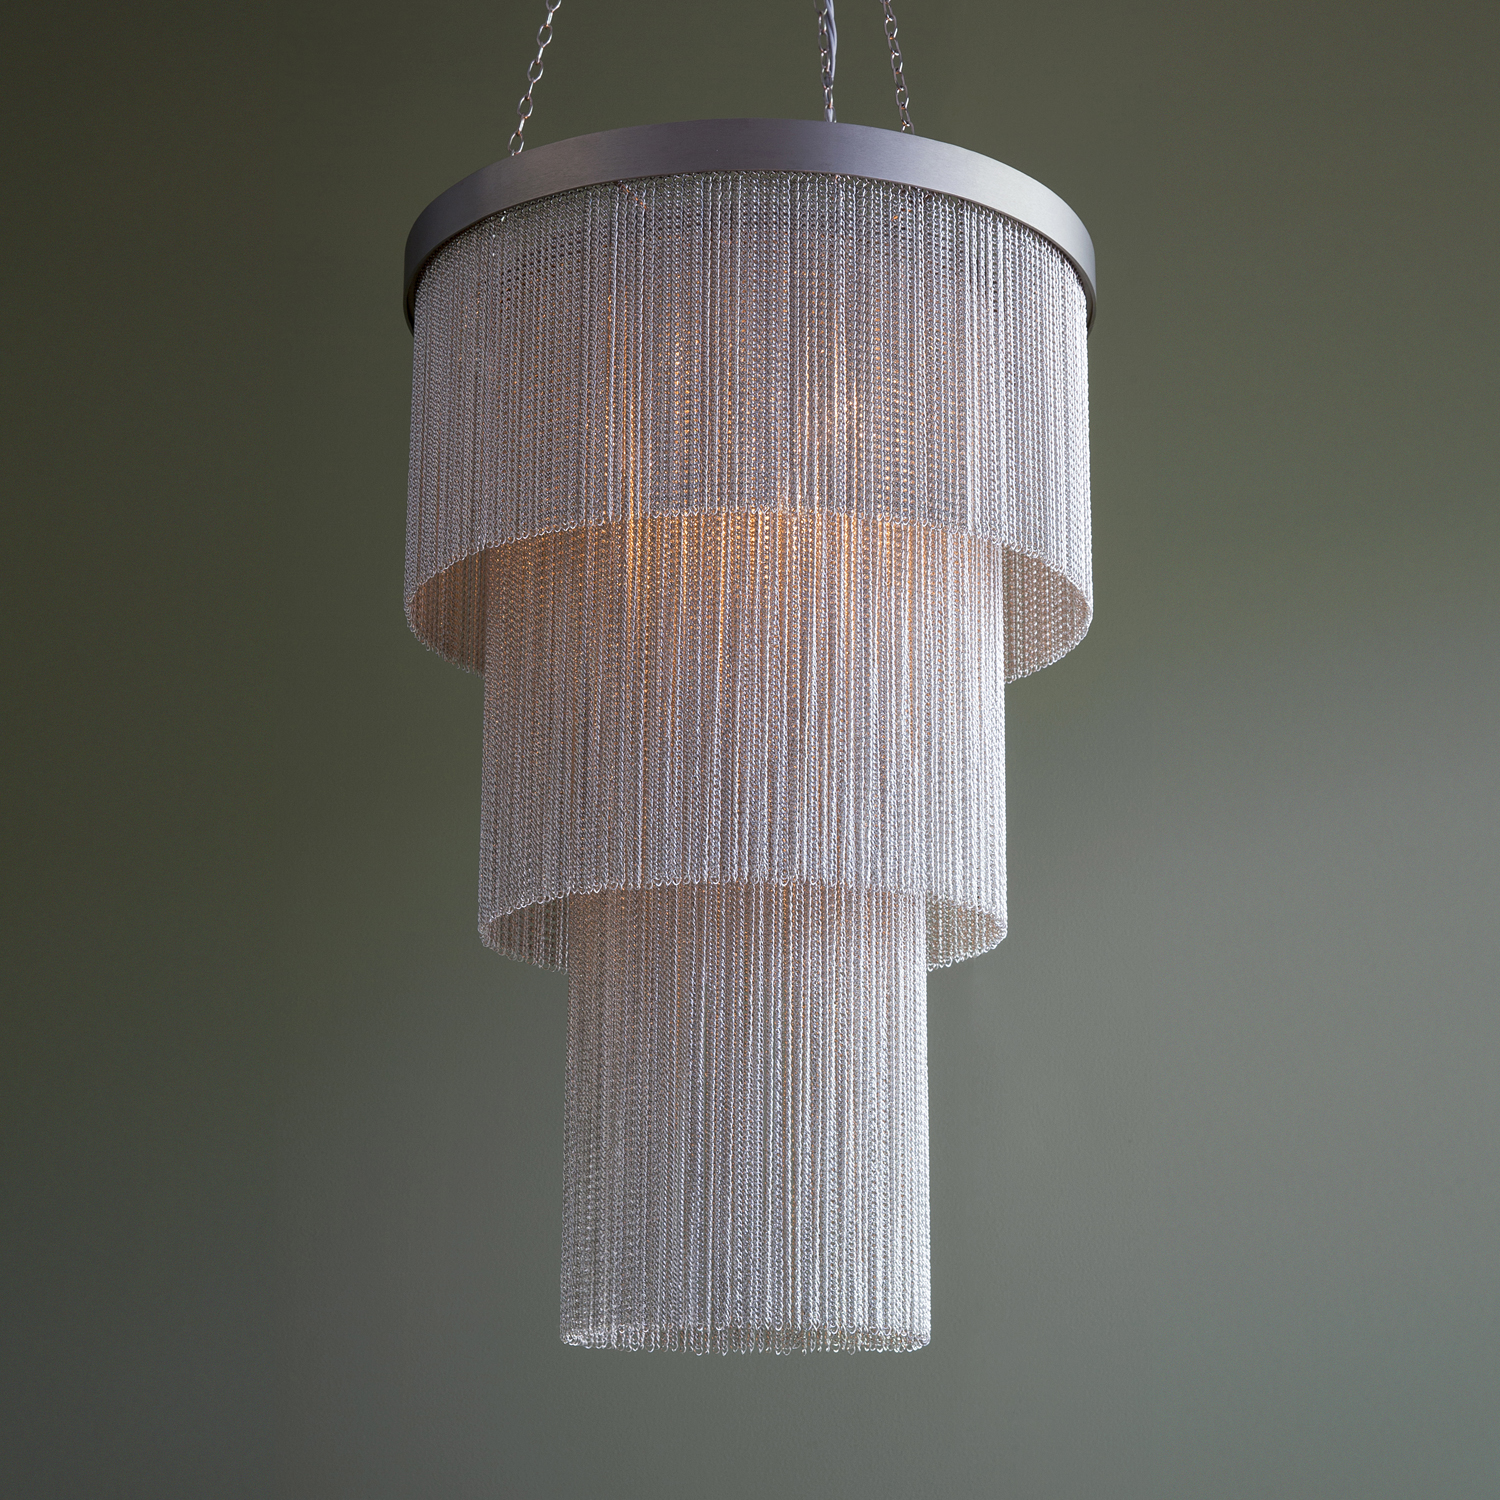 Long Silver Chain Chandelier by Tigermoth Lighting